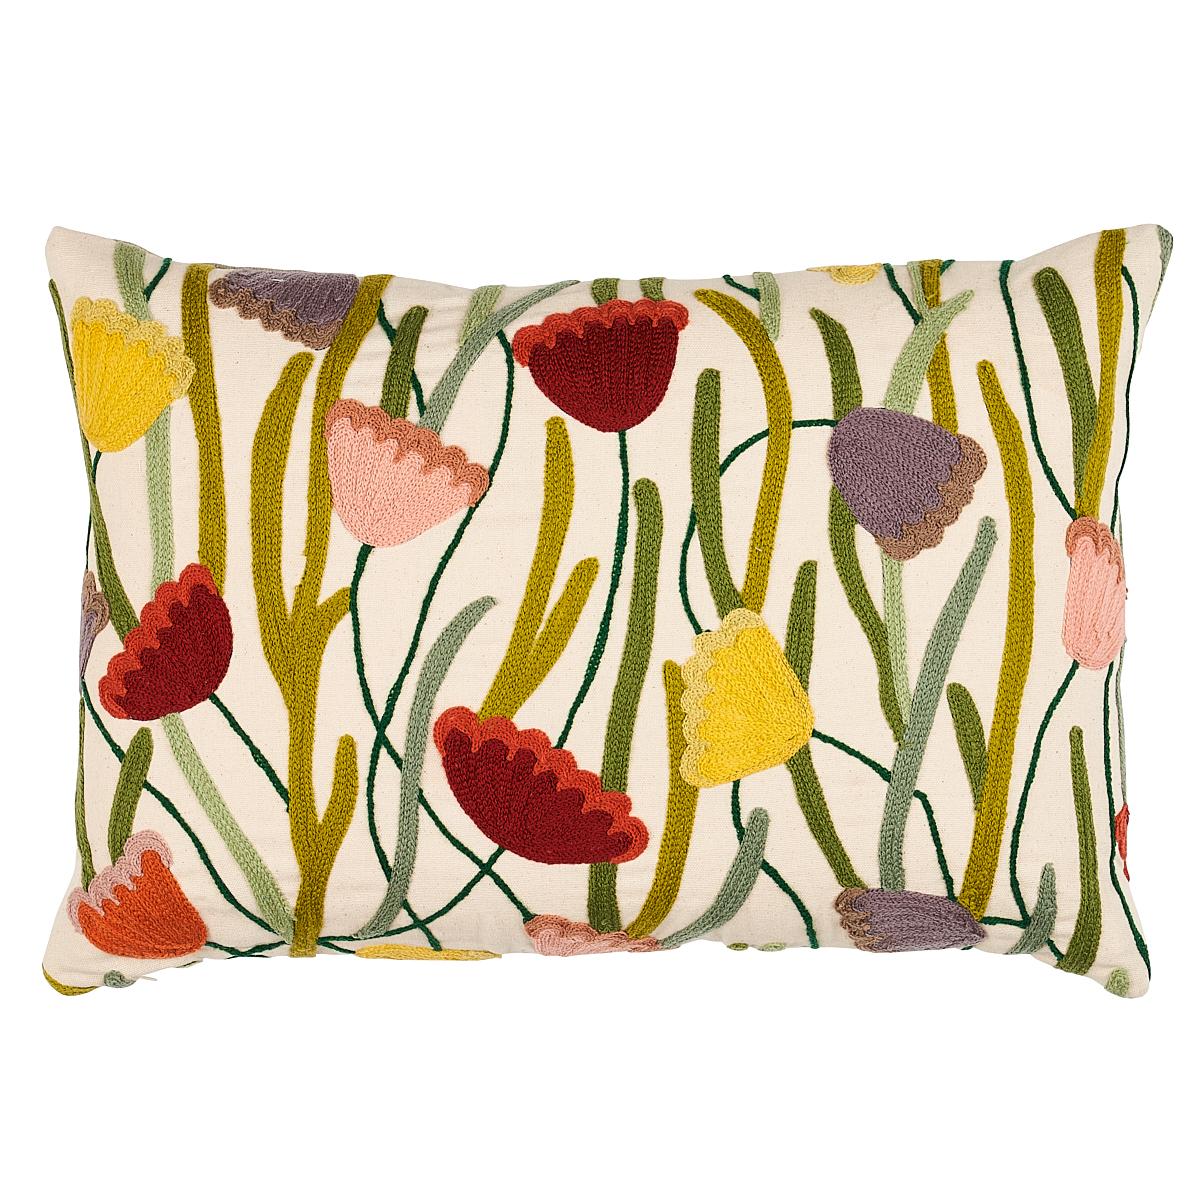 Schuamcher Deco Flower Embroidery 20" Pillow in Multi